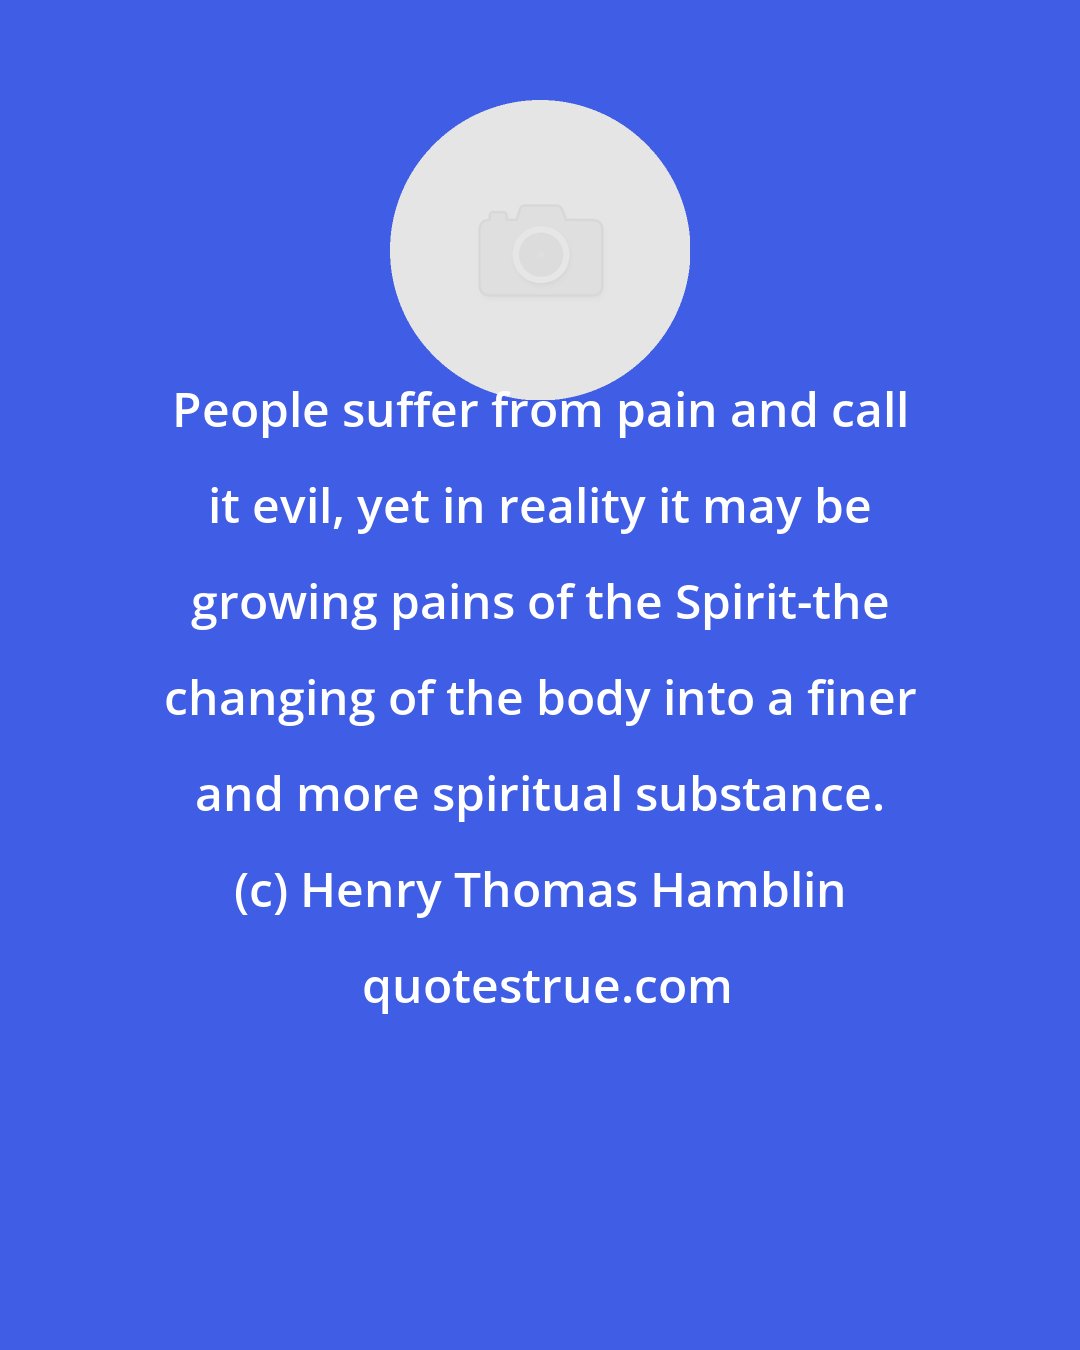 Henry Thomas Hamblin: People suffer from pain and call it evil, yet in reality it may be growing pains of the Spirit-the changing of the body into a finer and more spiritual substance.